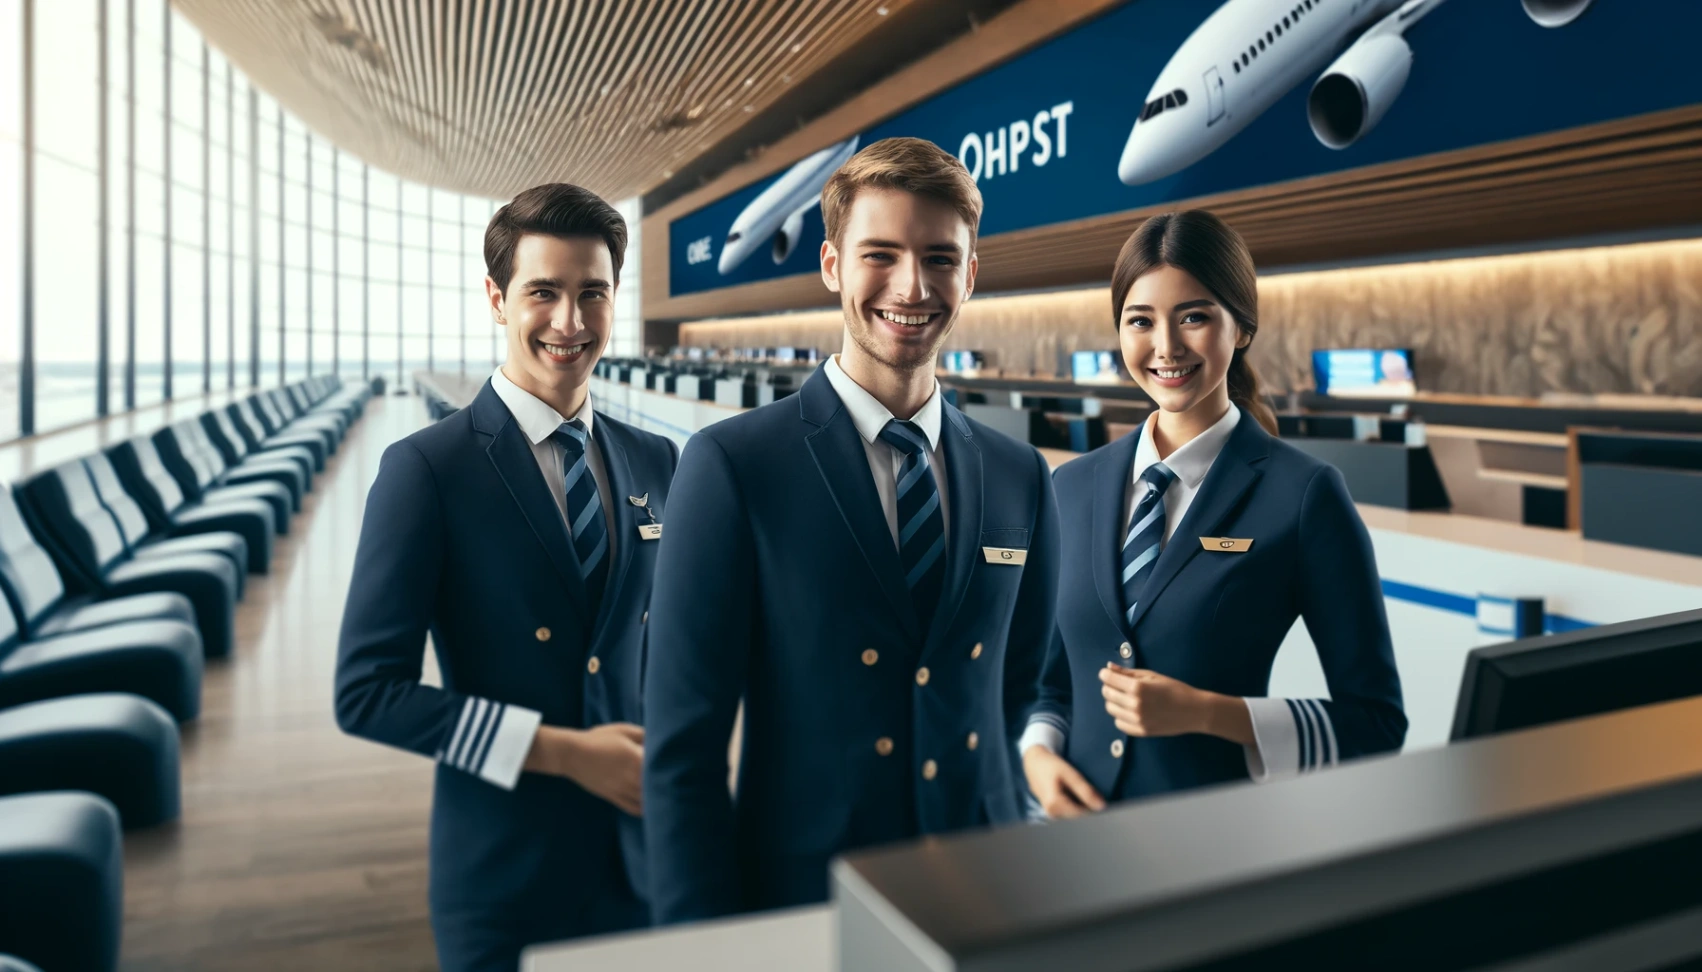 Explore Career Opportunities at Air France: Step-by-Step Guide